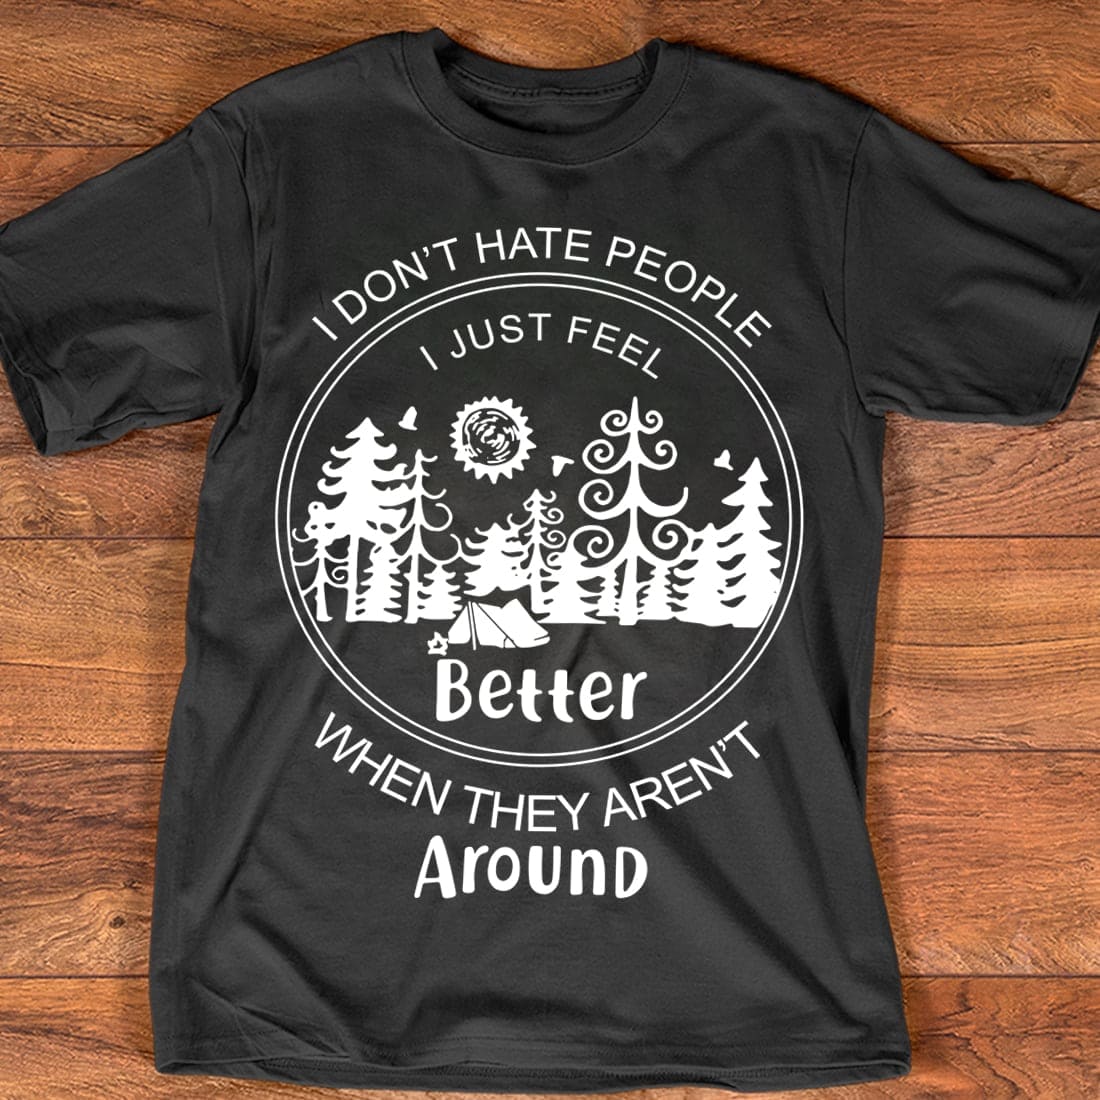 I don't hate people I just feel better when they aren't around - Camping in the wood